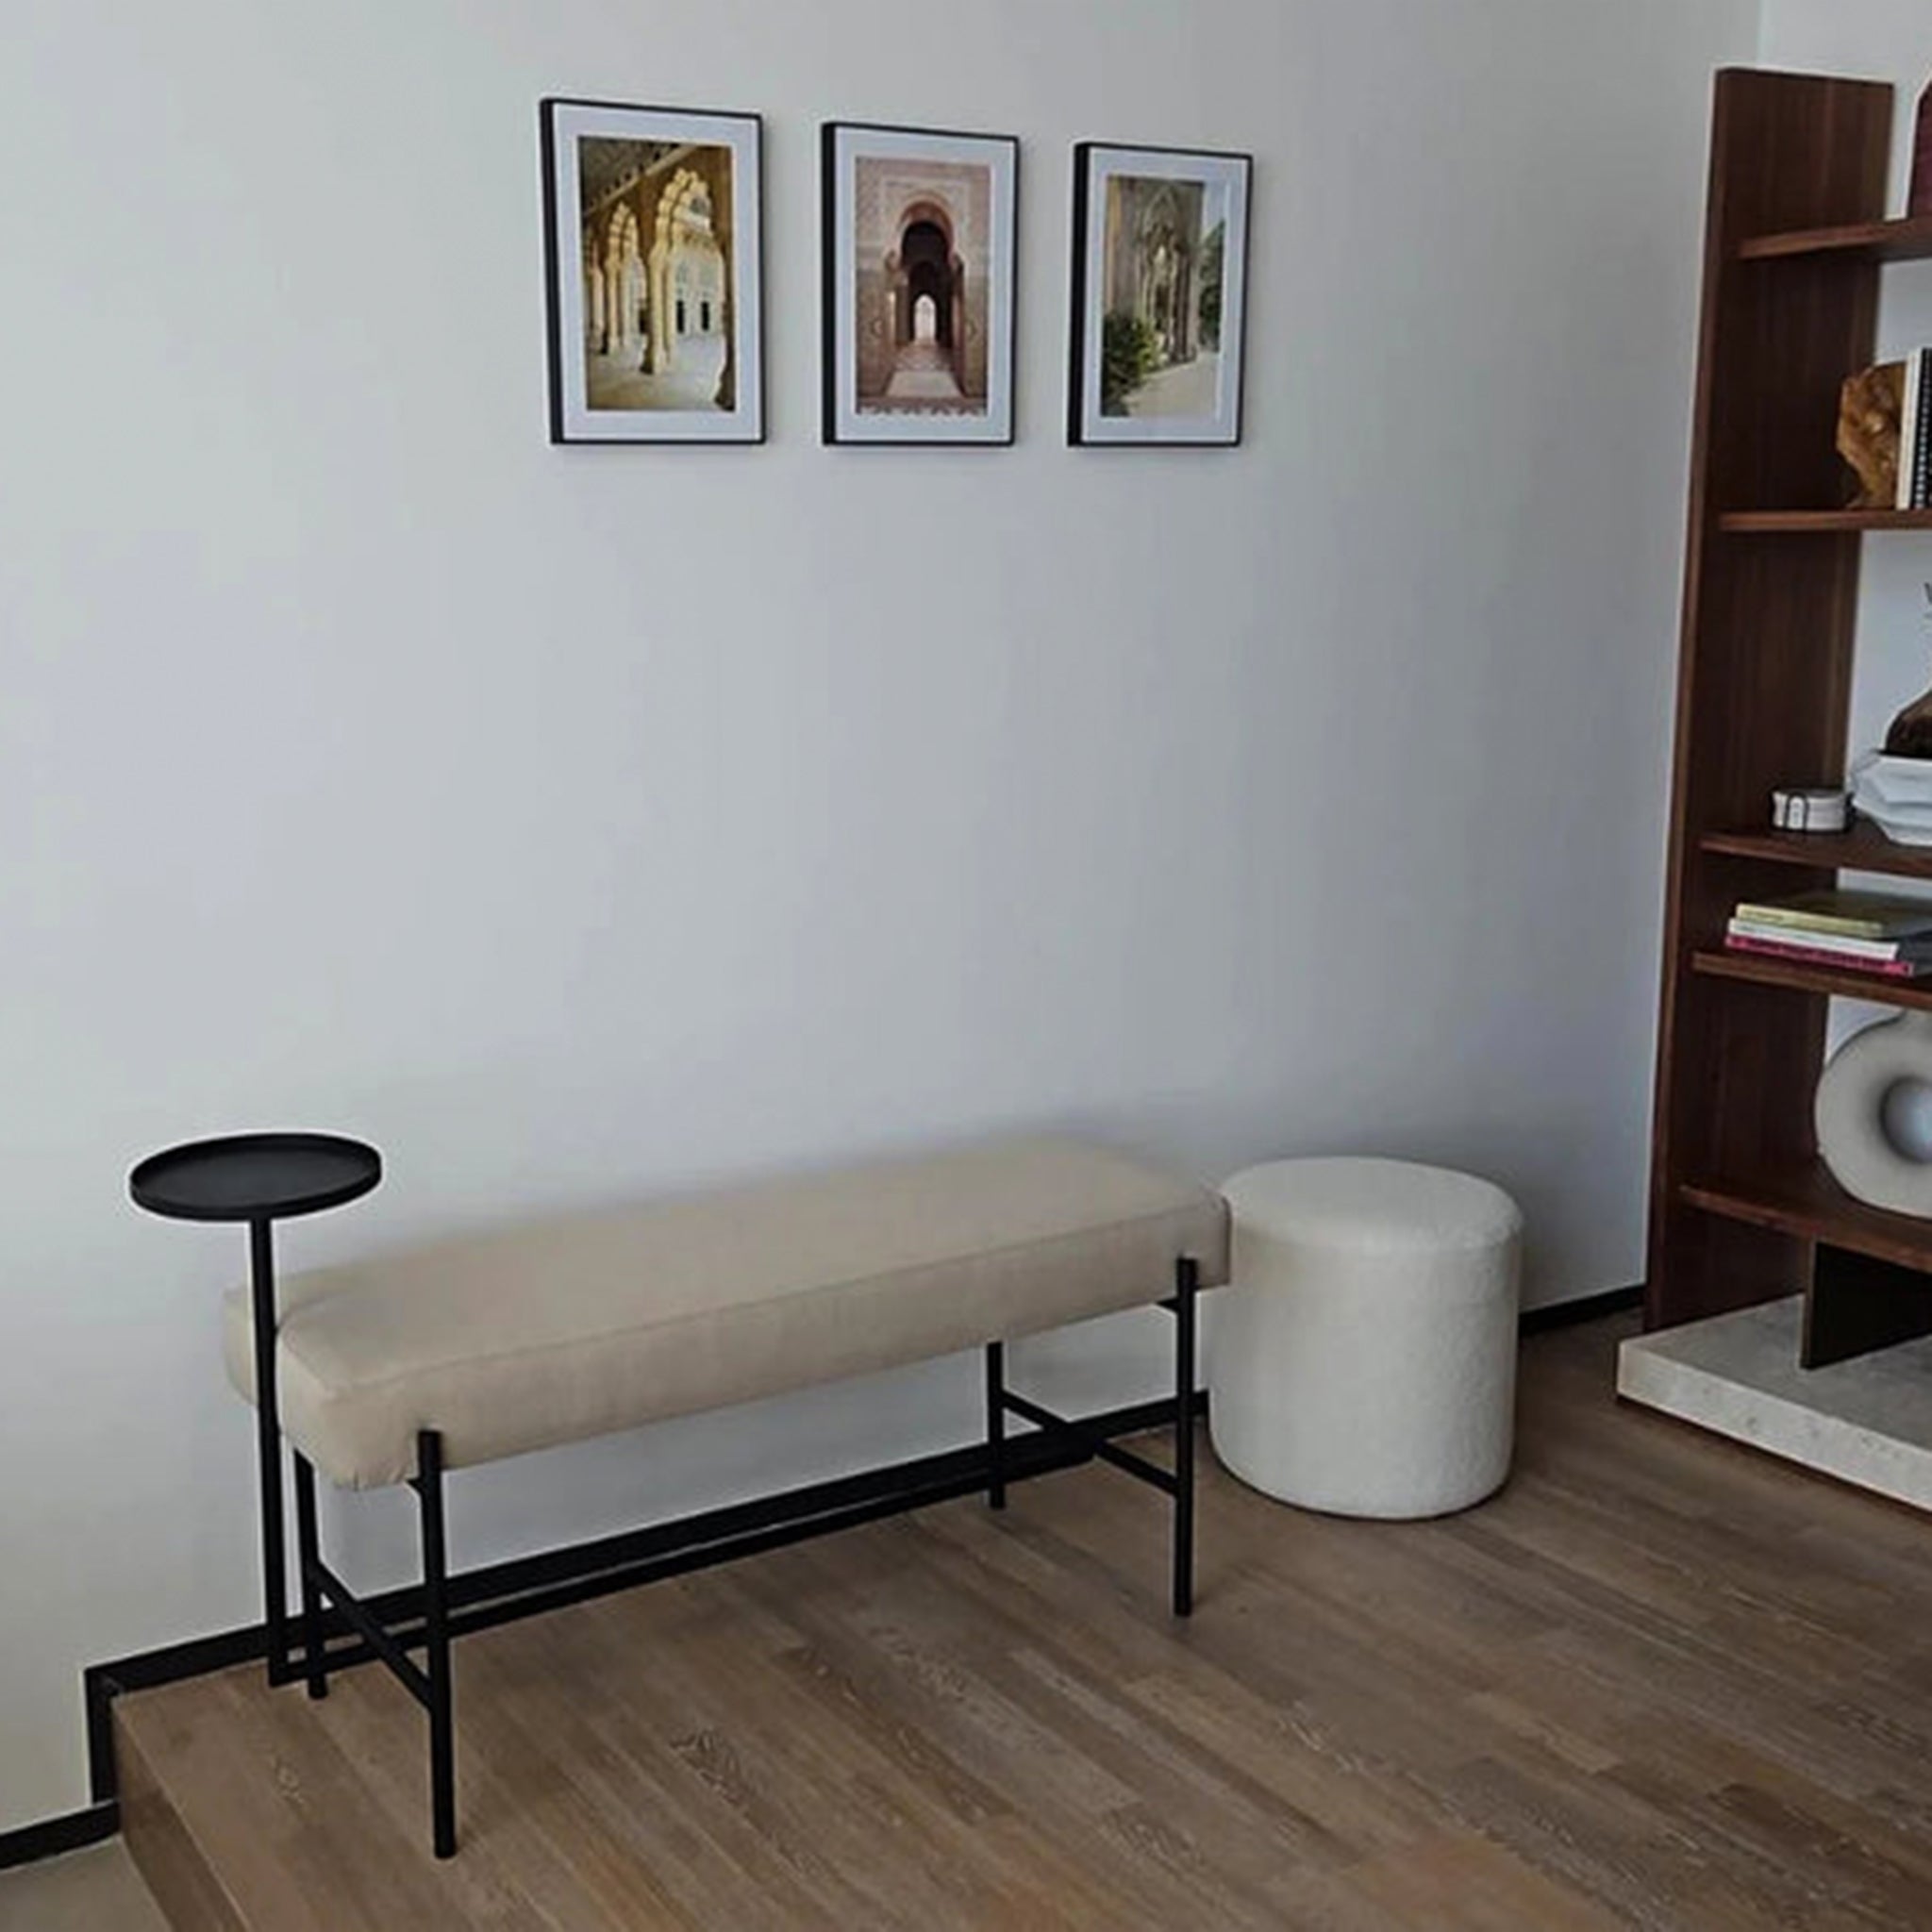 Stylish corner with The Danielle Bench, featuring a beige upholstered seat, black powder-coated steel frame, and an attached side table, accented by framed artwork and a modern bookshelf